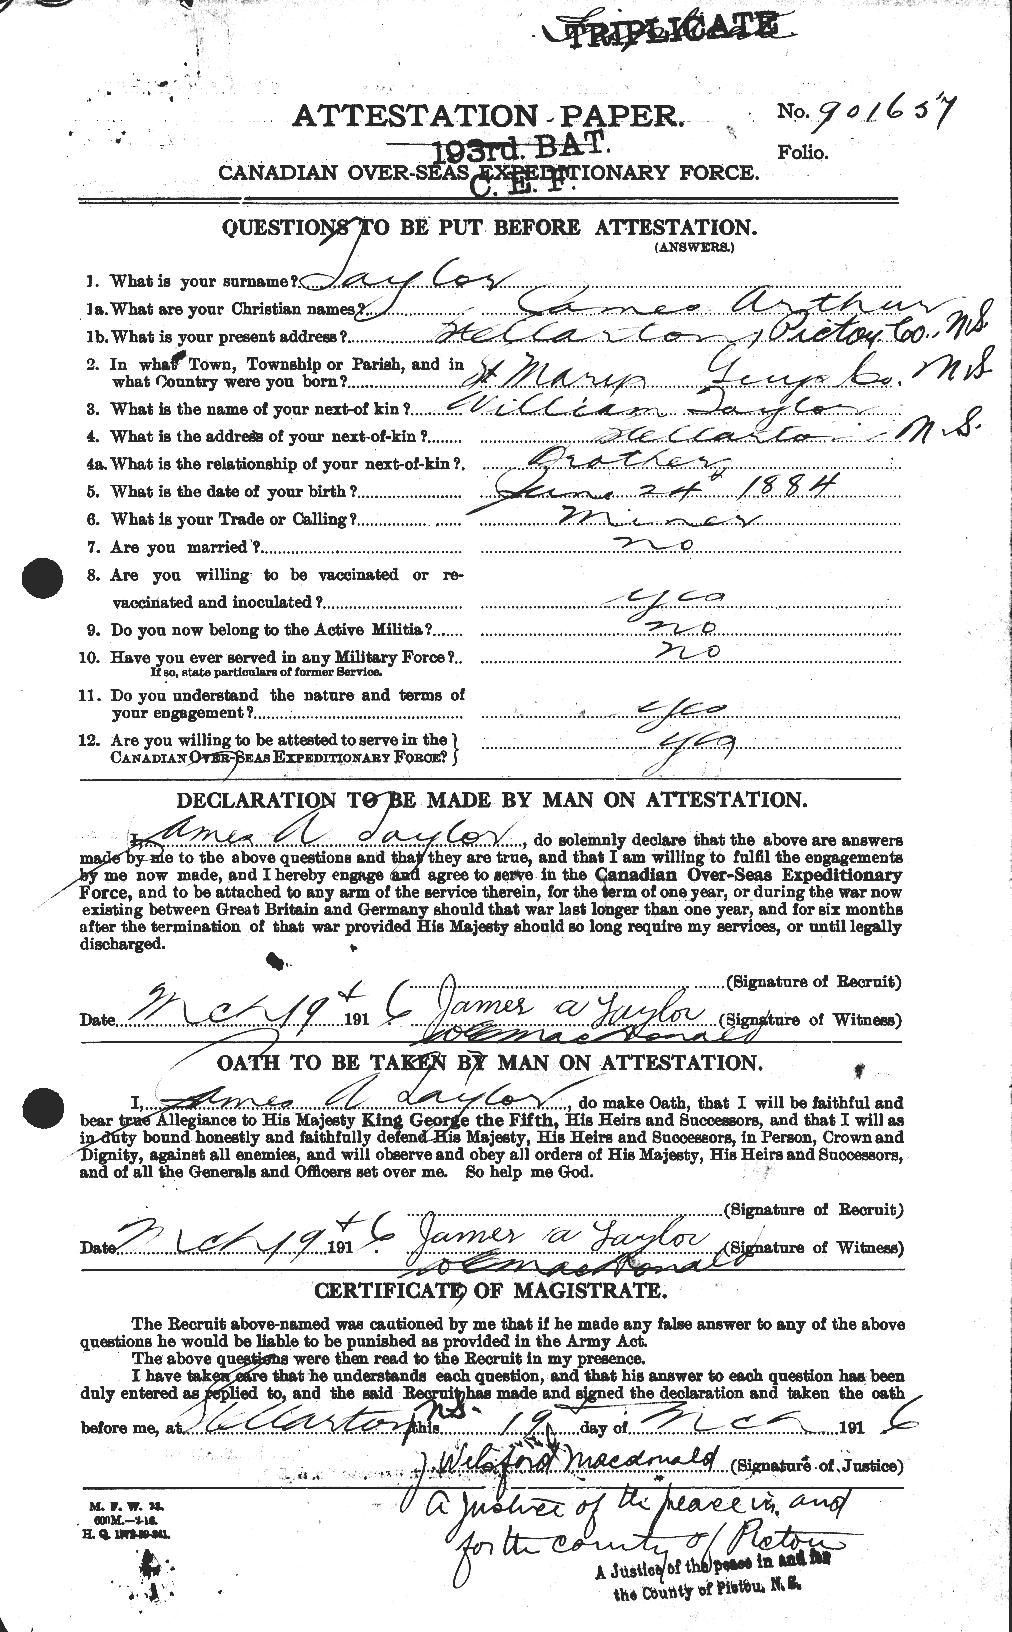 Personnel Records of the First World War - CEF 626906a